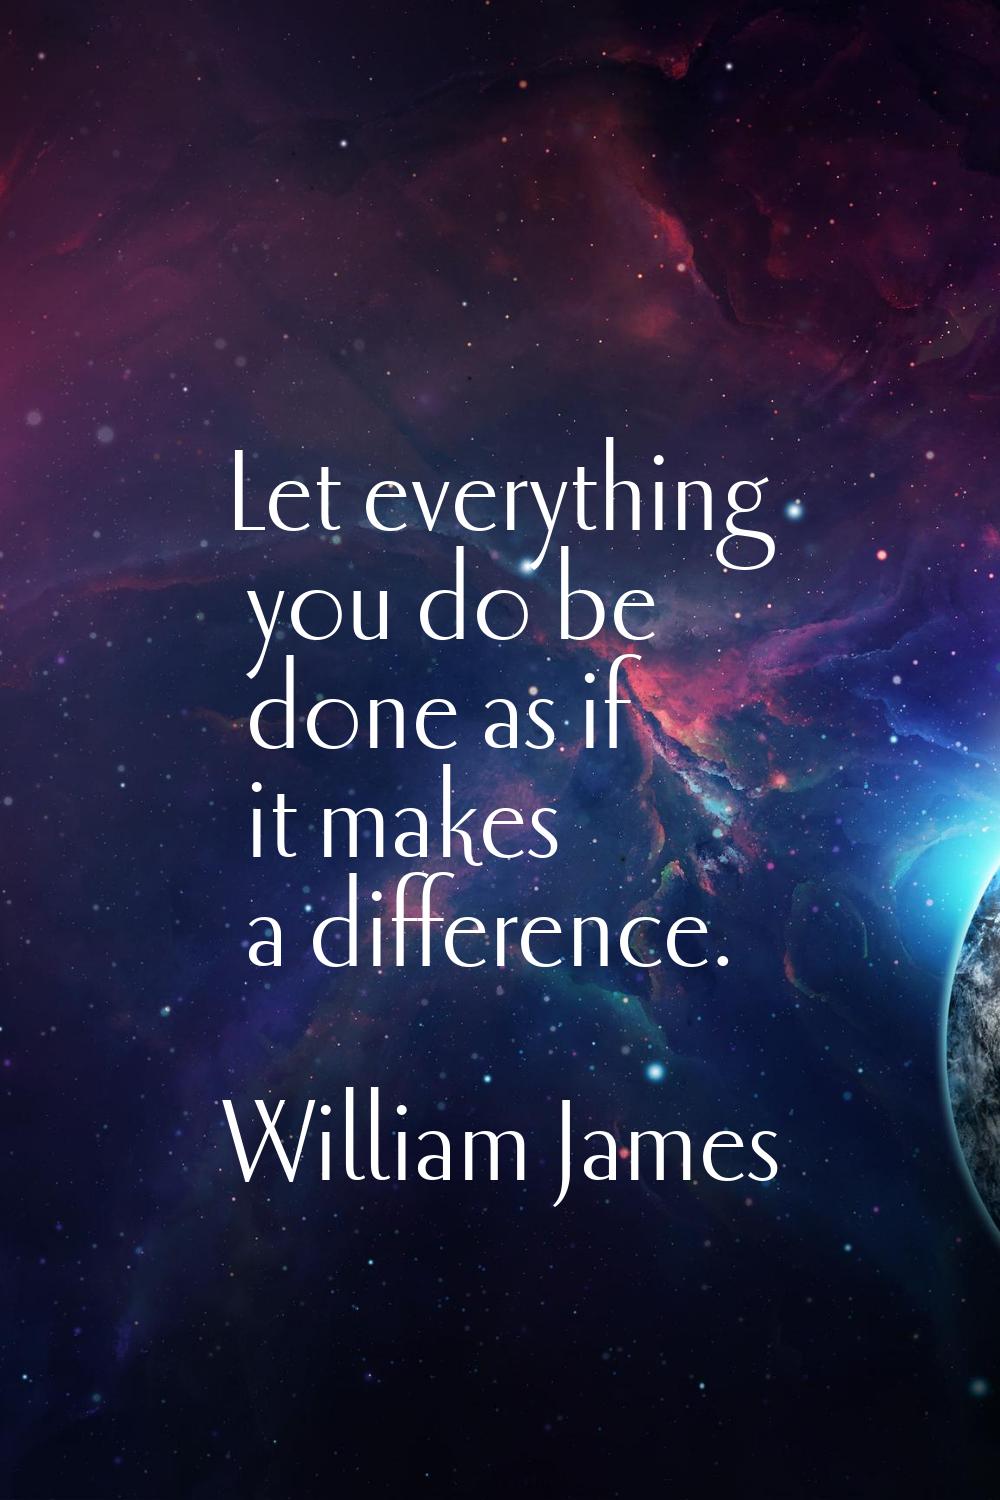 Let everything you do be done as if it makes a difference.